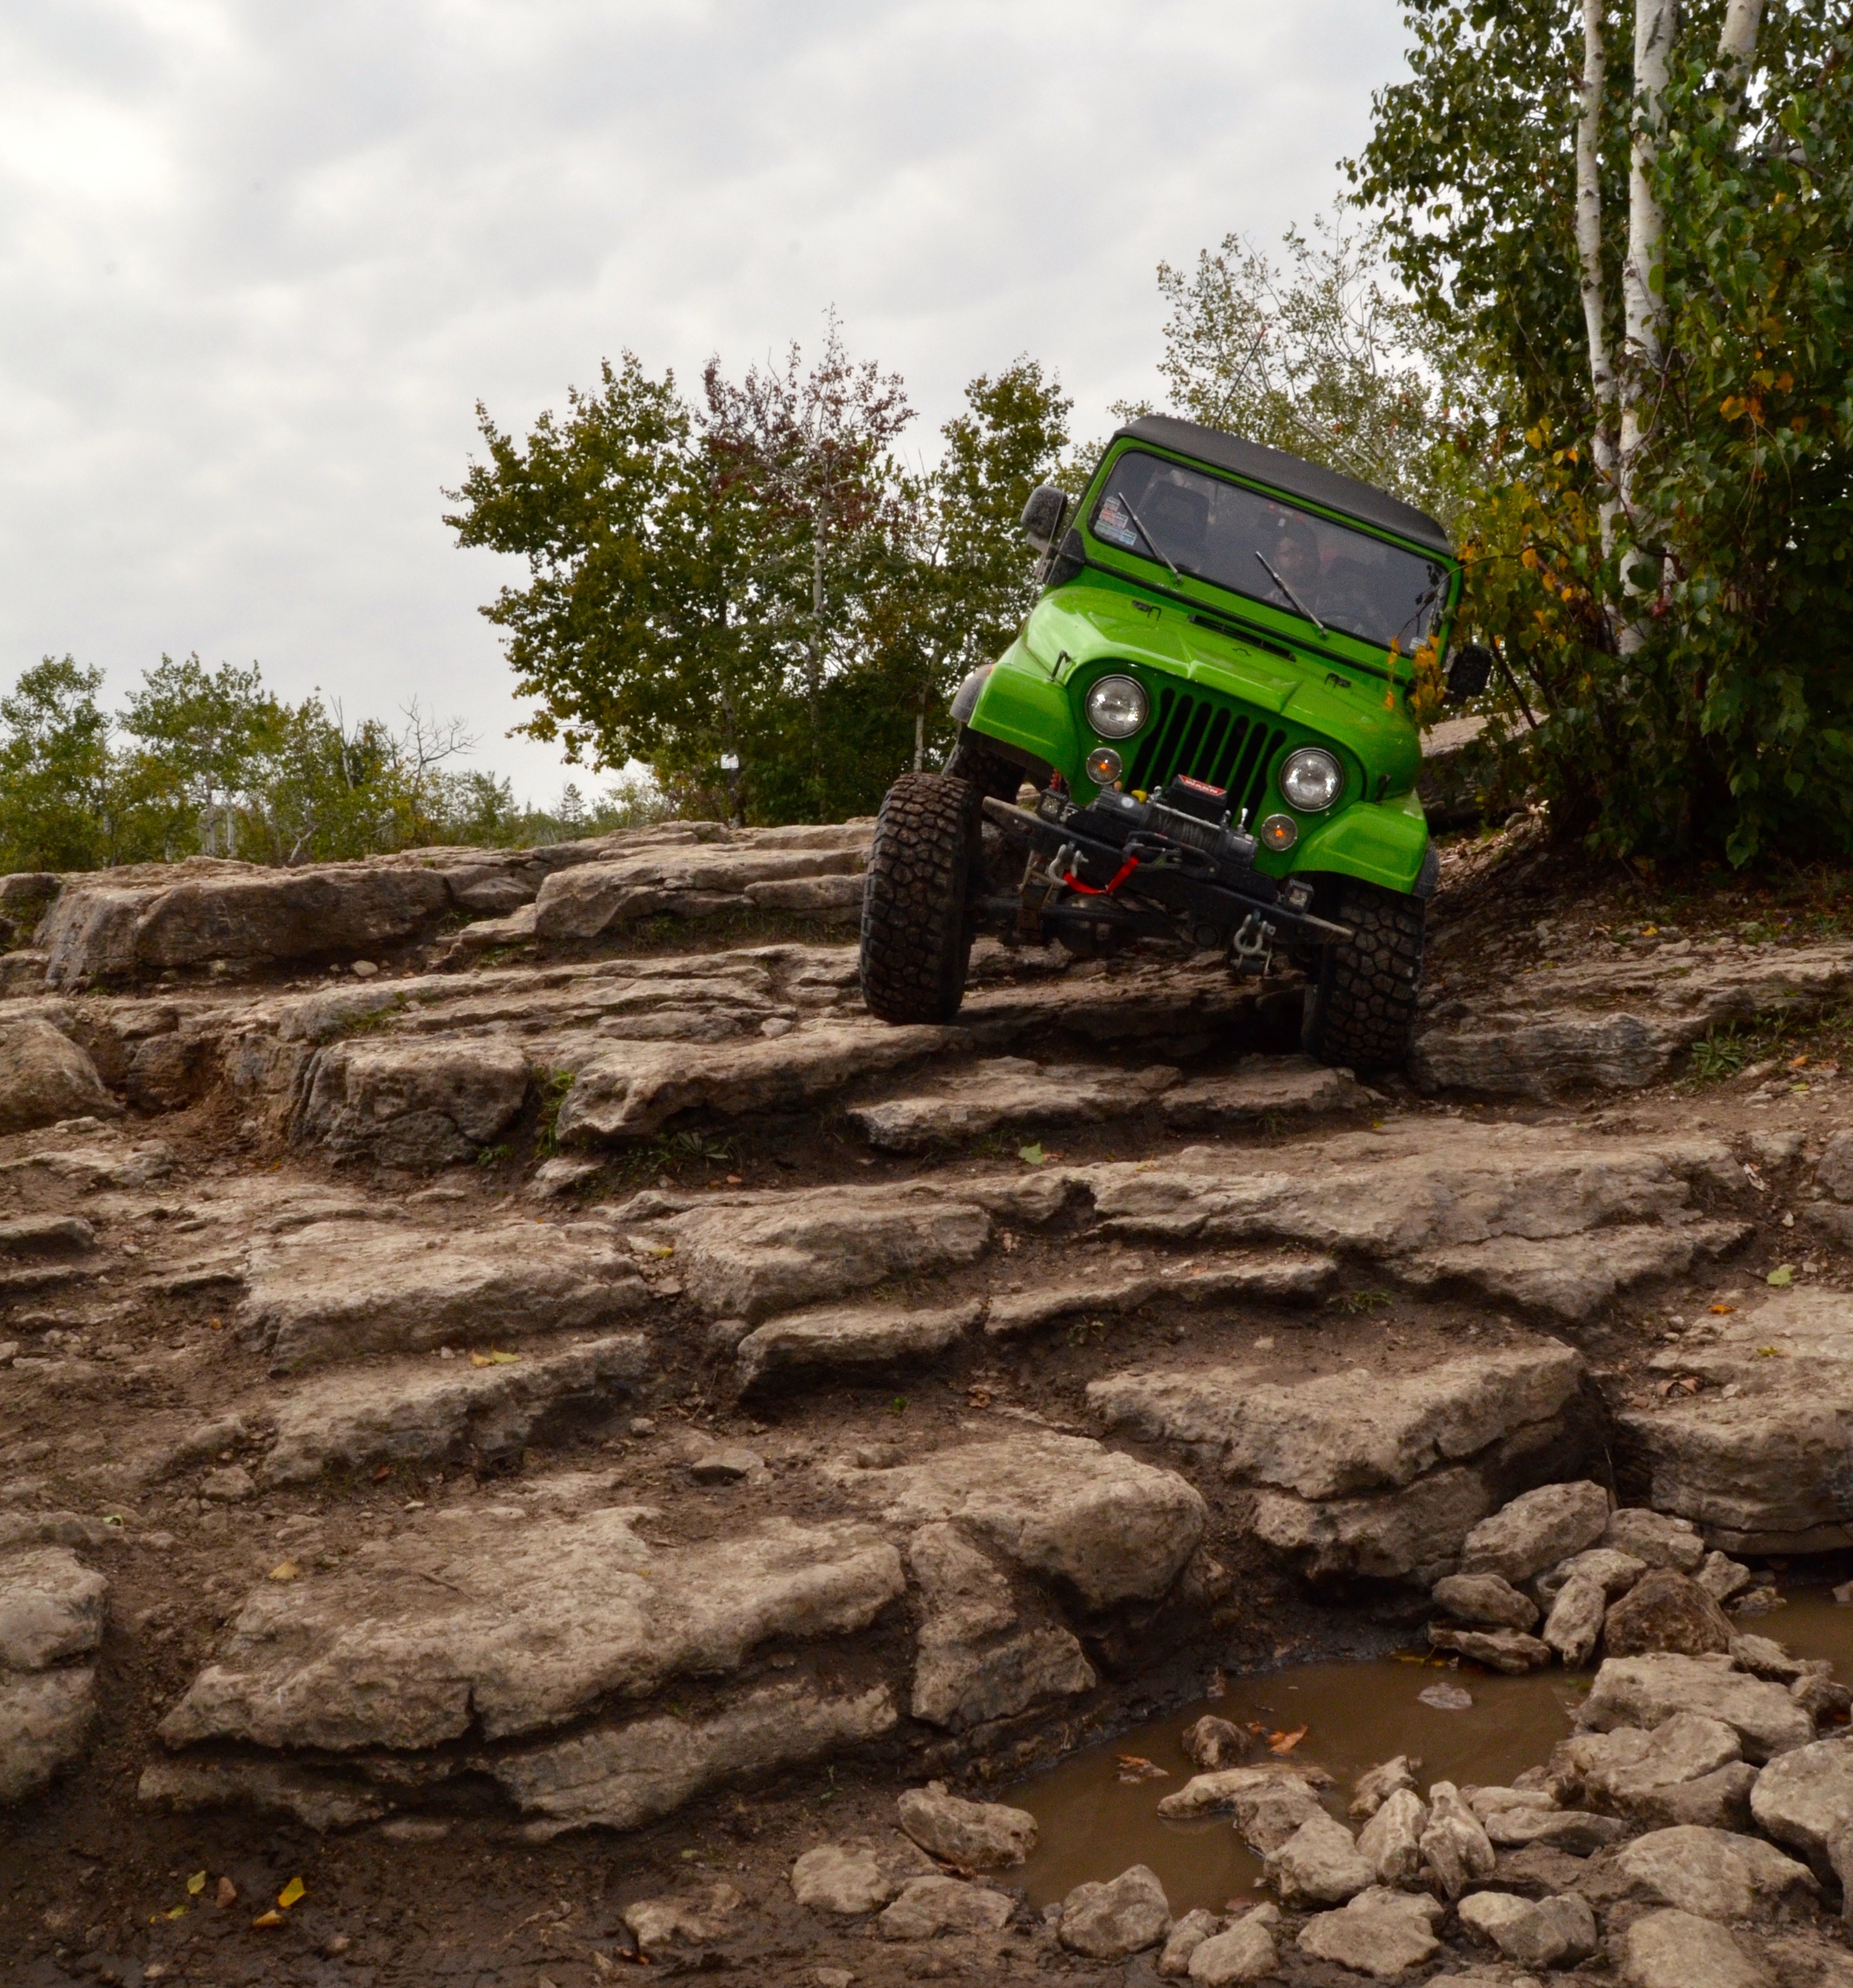 Jeep at The Steps at Marblehead, Drummond Island, September